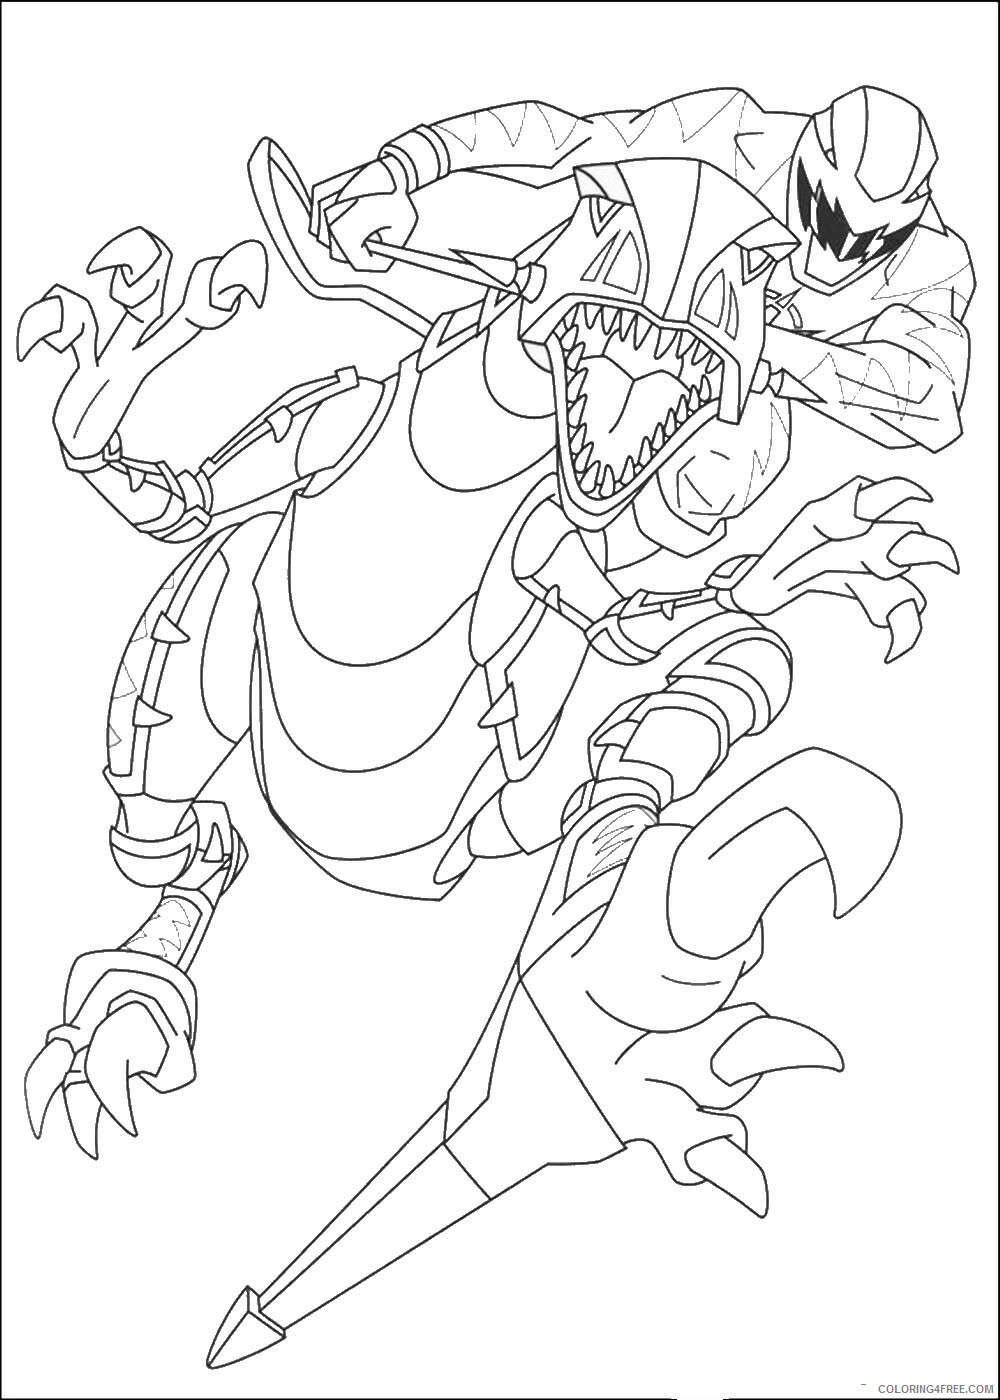 Power Rangers Coloring Pages TV Film power rangers 90 Printable 2020 06722 Coloring4free